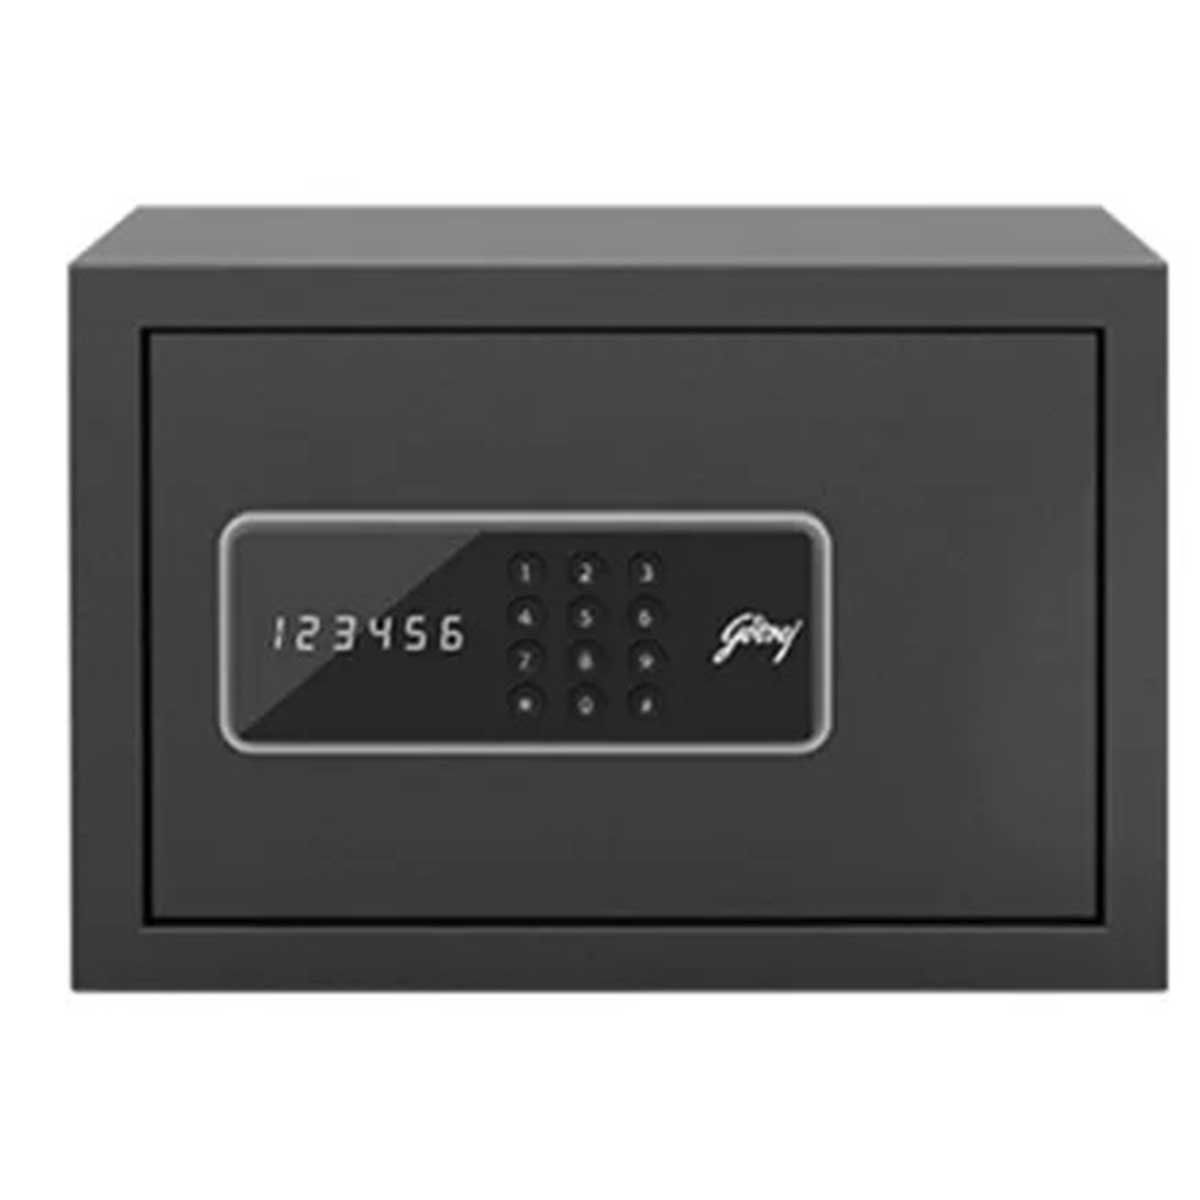 Security Safes Manufacturers, Suppliers, Exporters in Delhi 